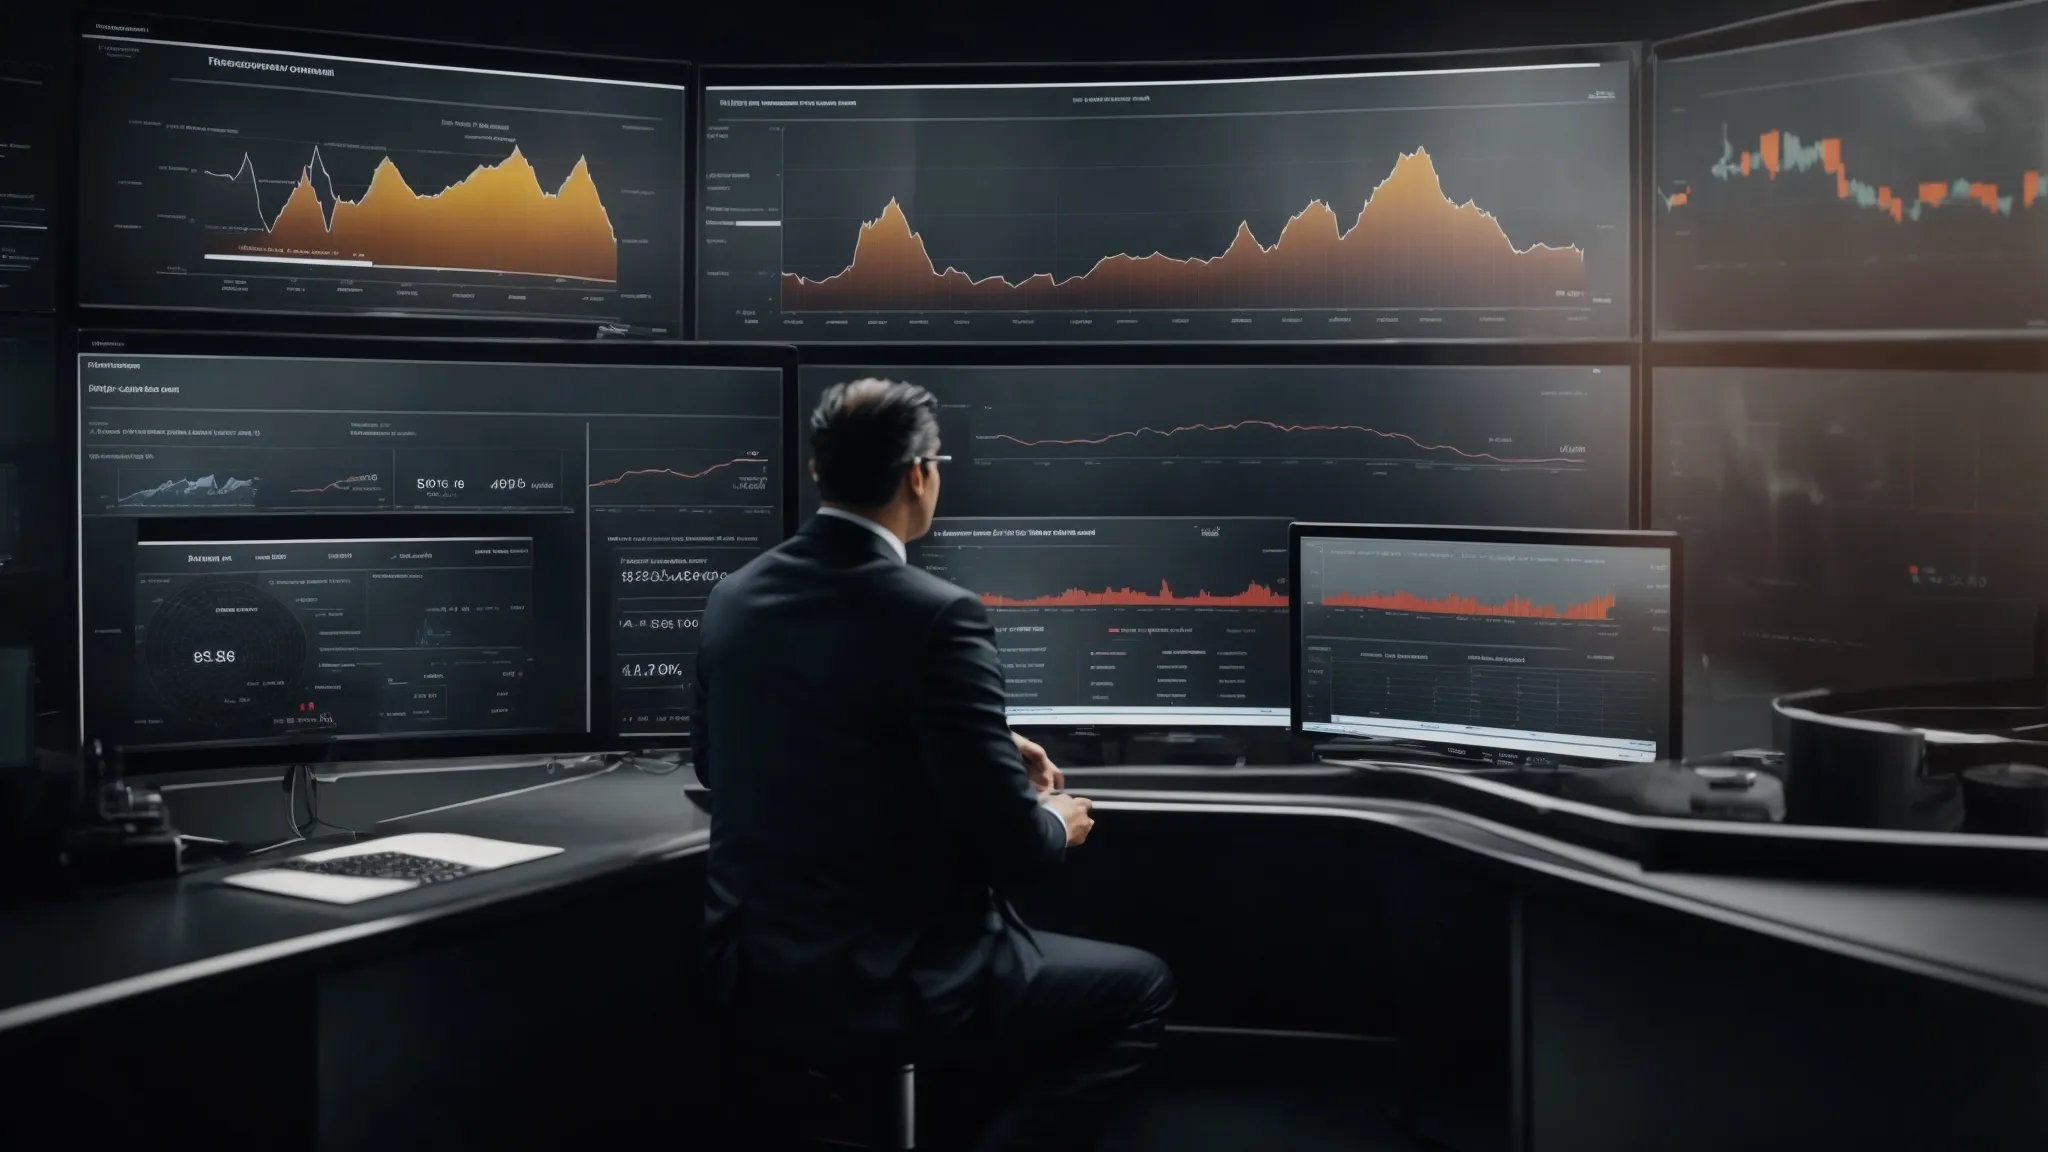 two executives examine a large dashboard displaying various graphs and charts related to automotive industry metrics.